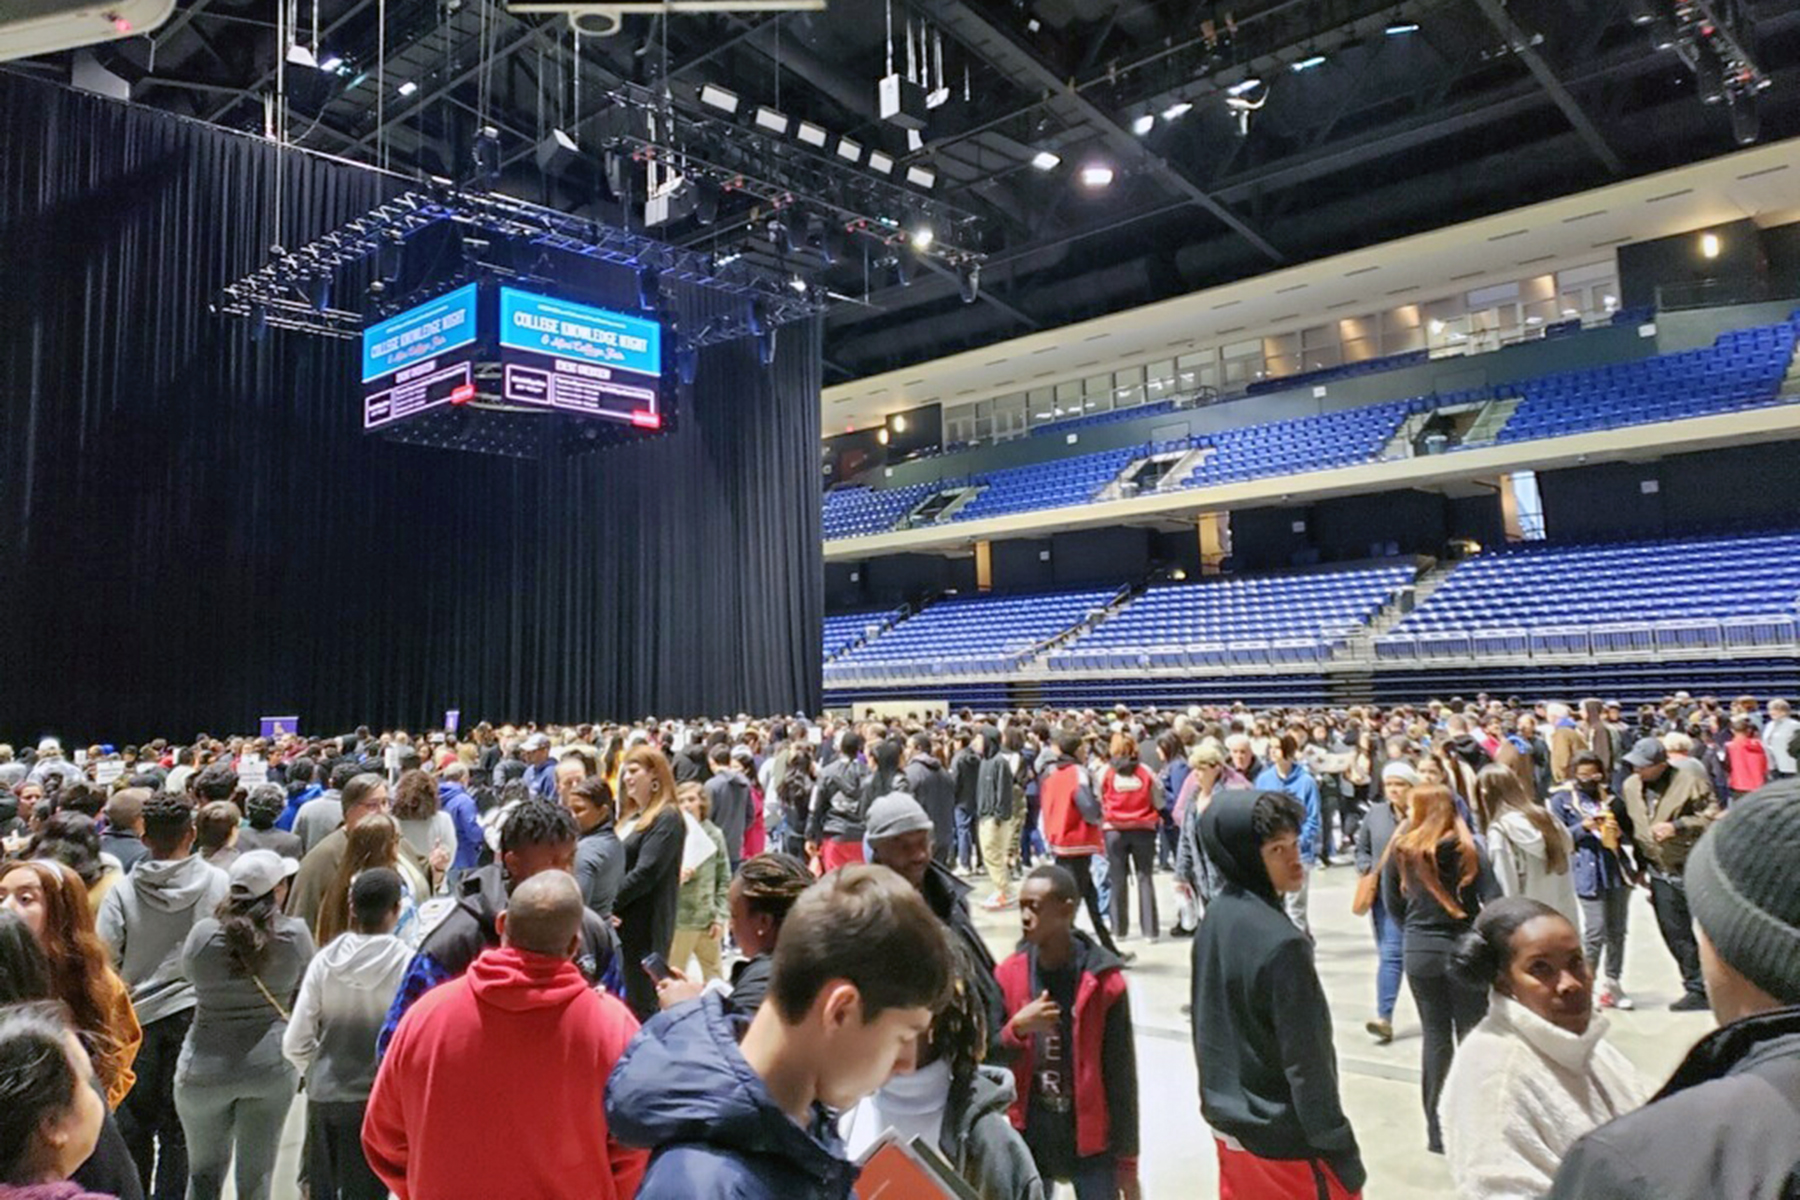 College Knowledge Night Draws Record Crowd to Berry Center